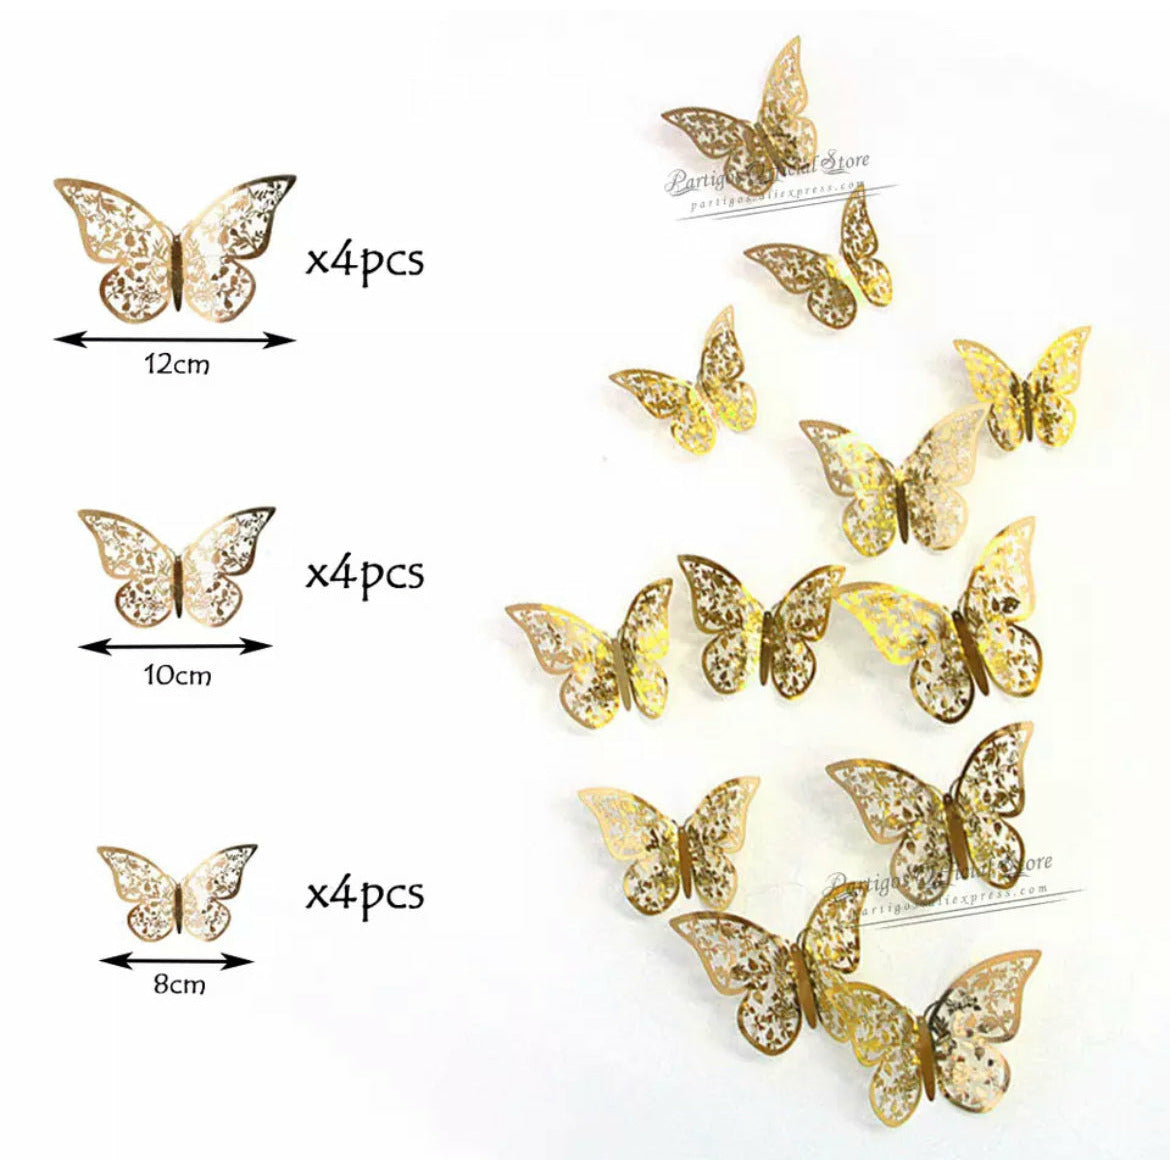 Pretty butterfly toppers - Packs of 12 include 3 sizes